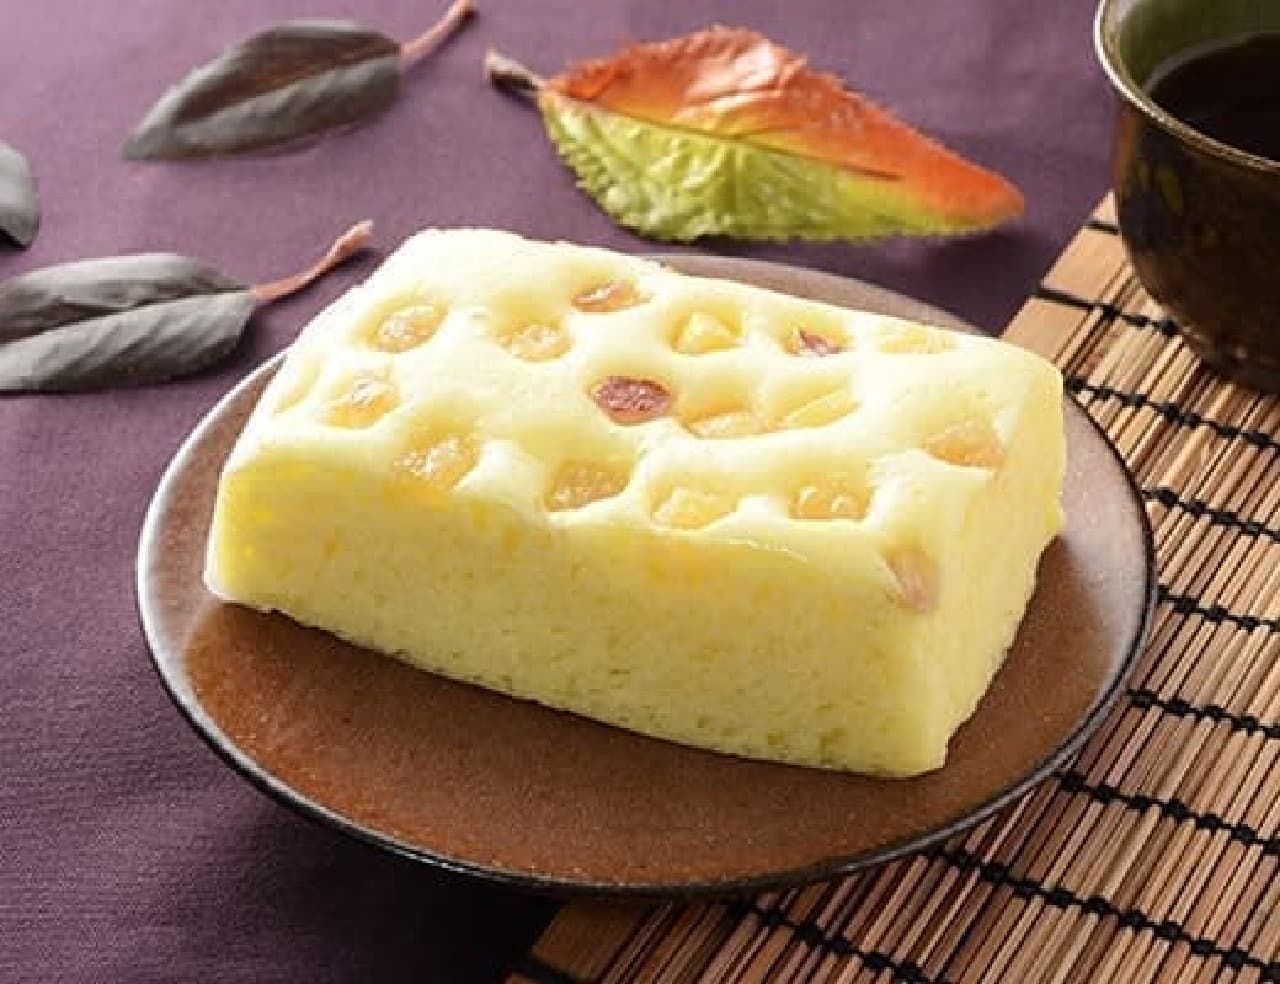 Lawson "Steamed bread with Oimozushi"